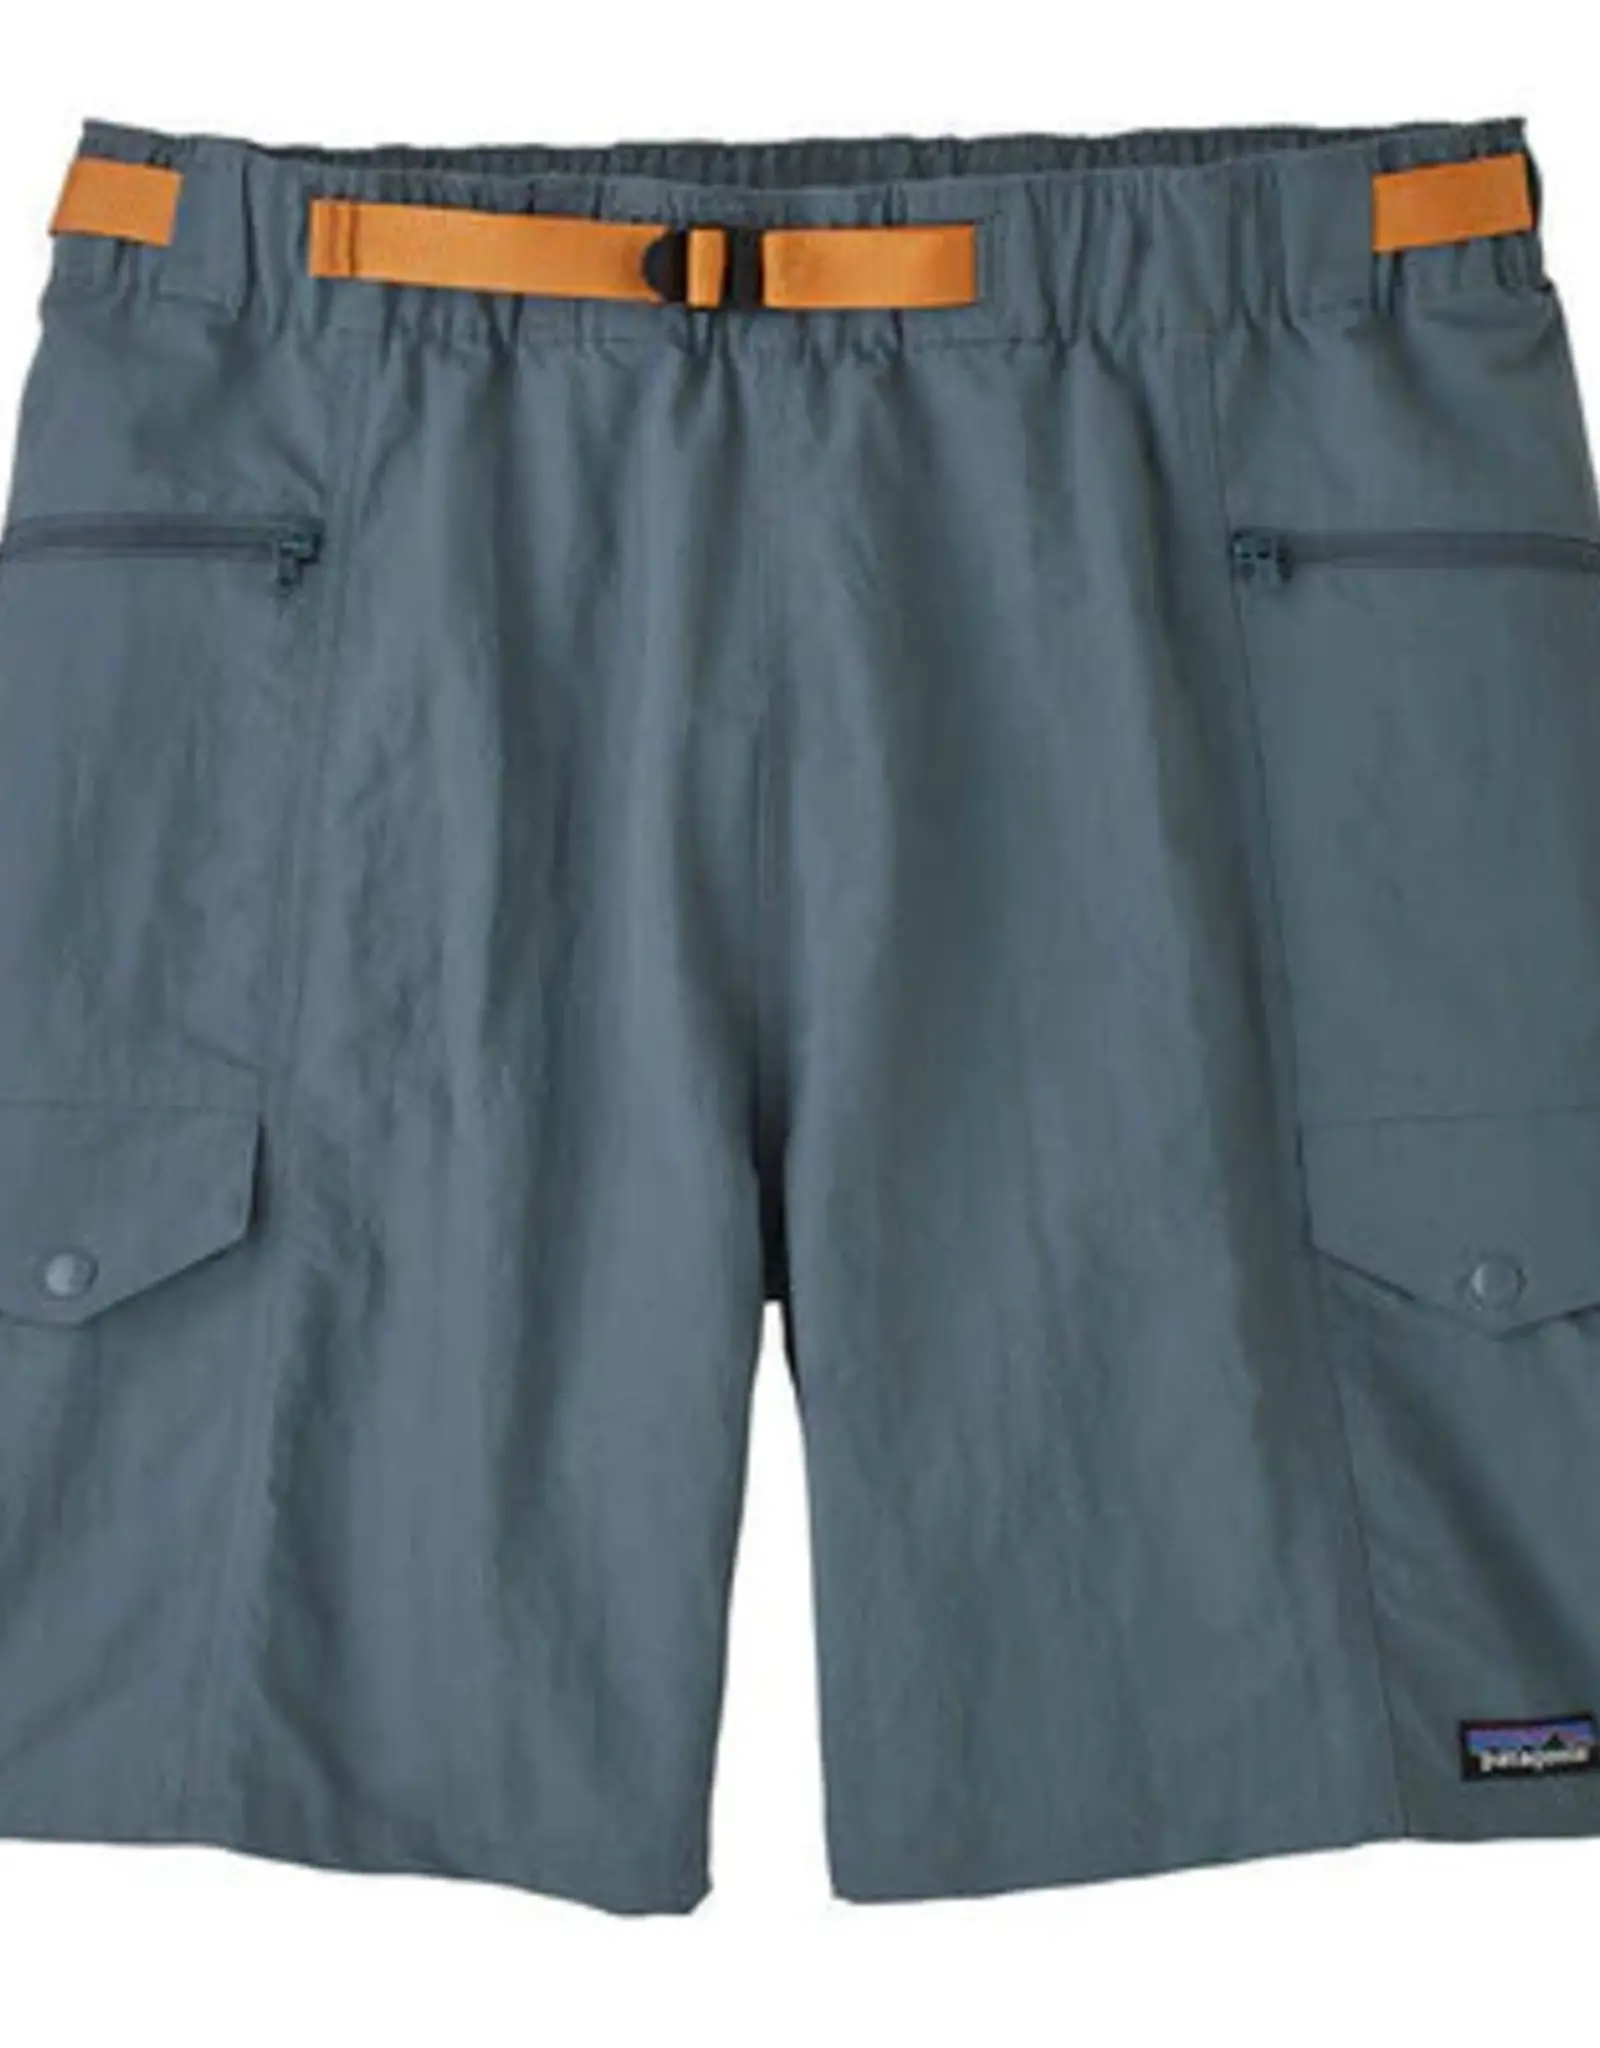 Patagonia Patagonia Men's Outdoor Everyday Shorts - 7inch